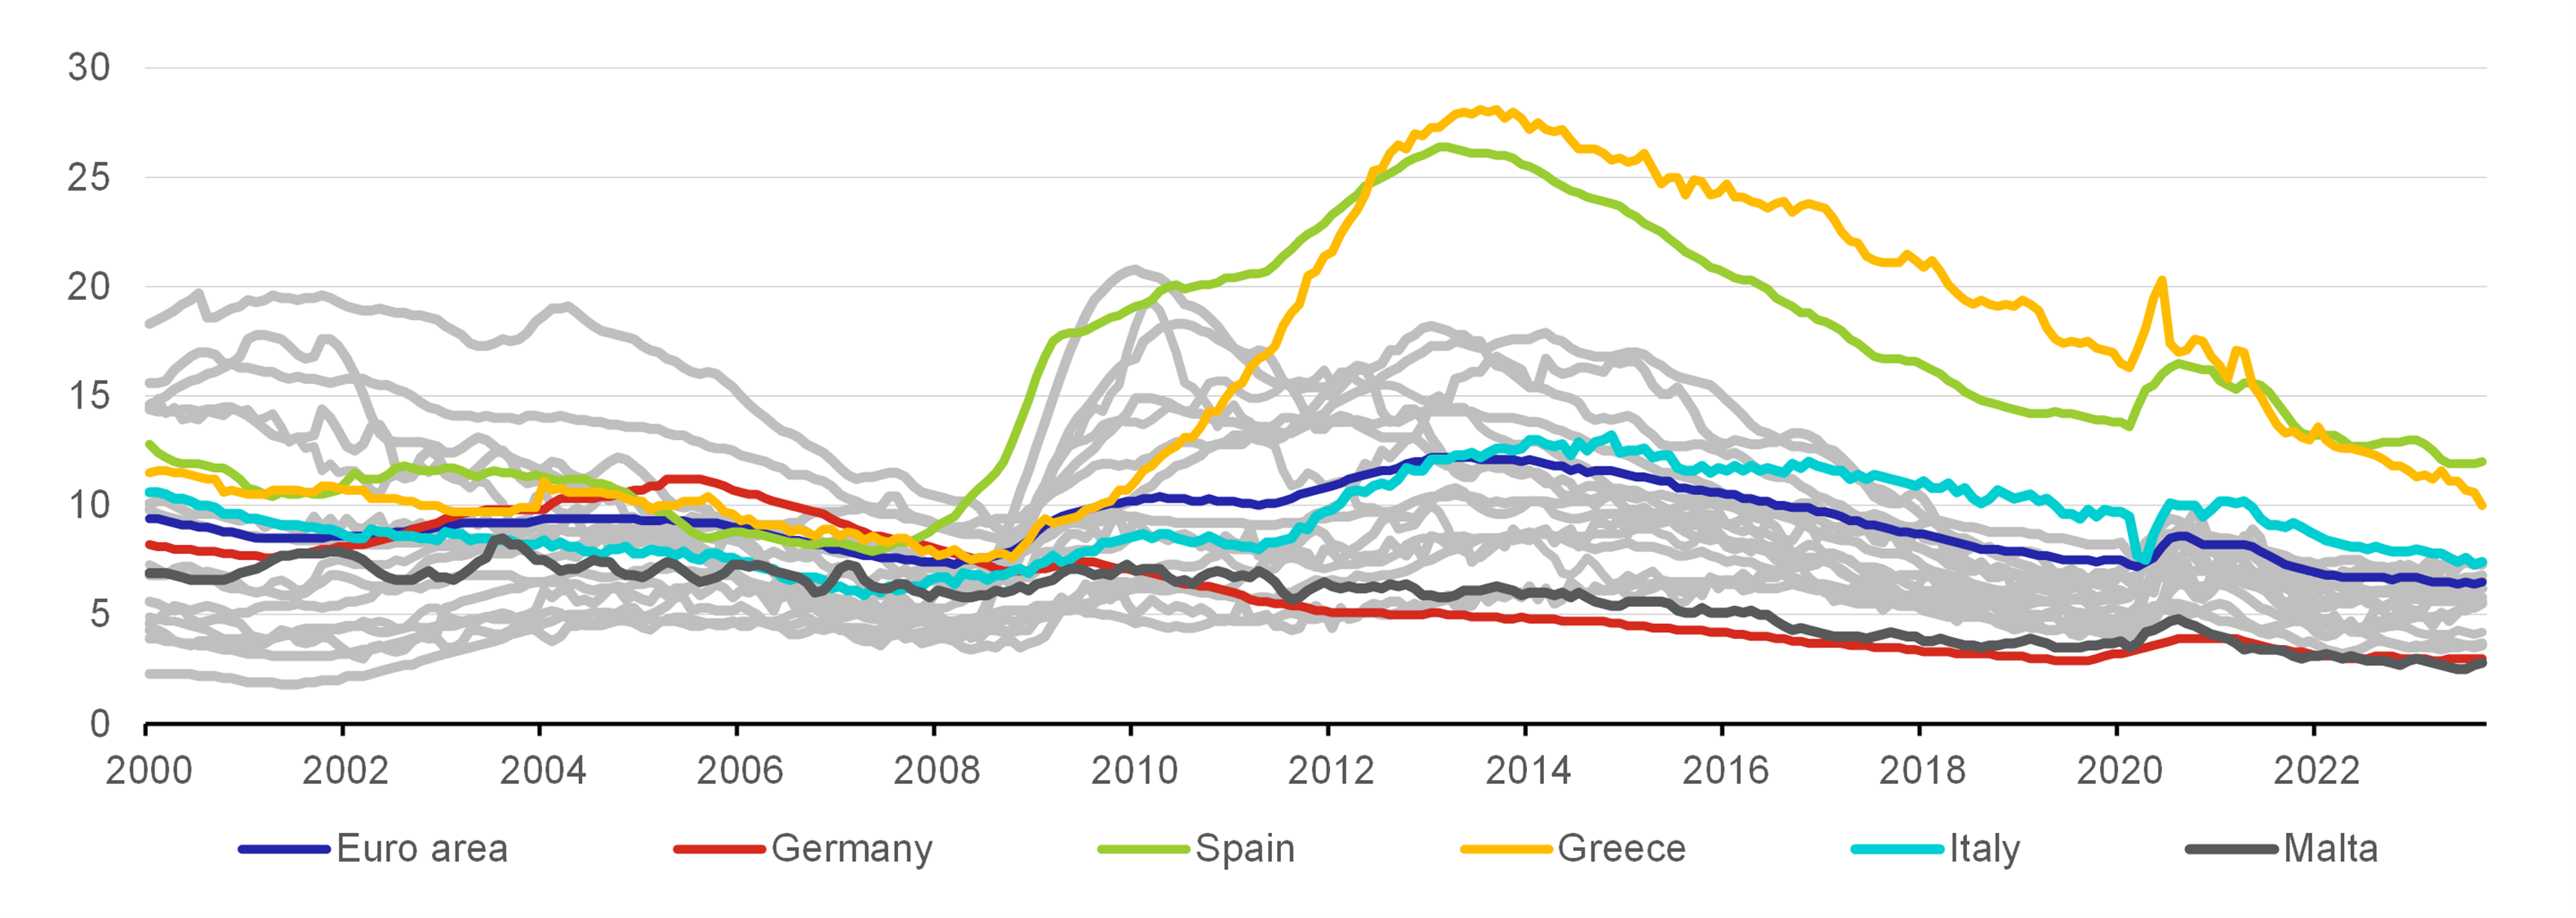 Chart 1 – Unemployment rates across euro area countries